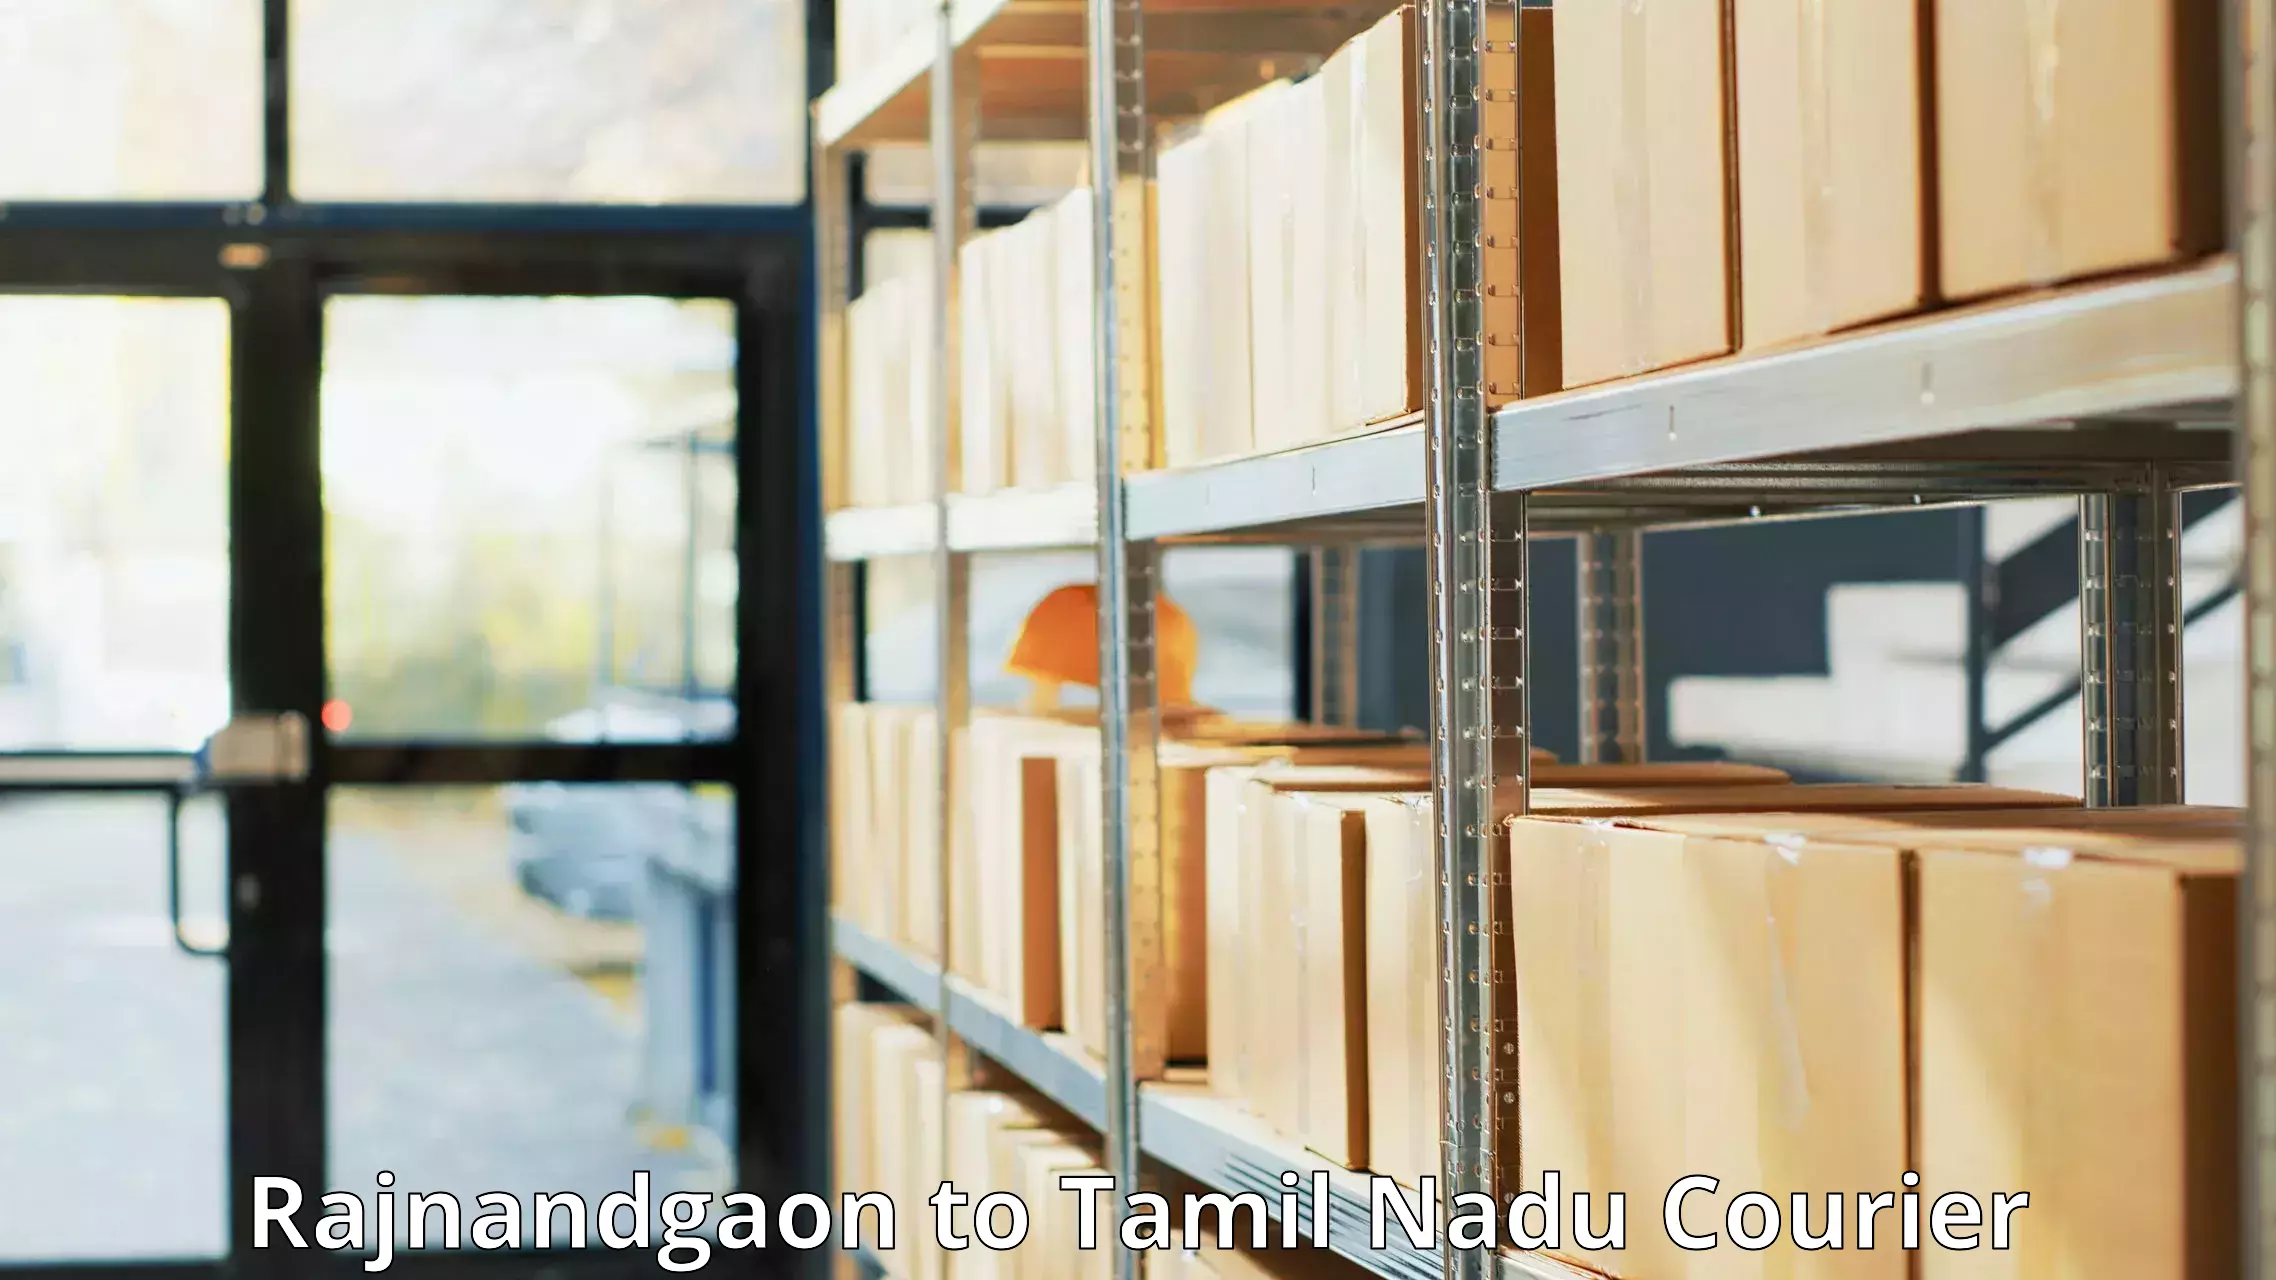 Courier service partnerships Rajnandgaon to Vellore Institute of Technology